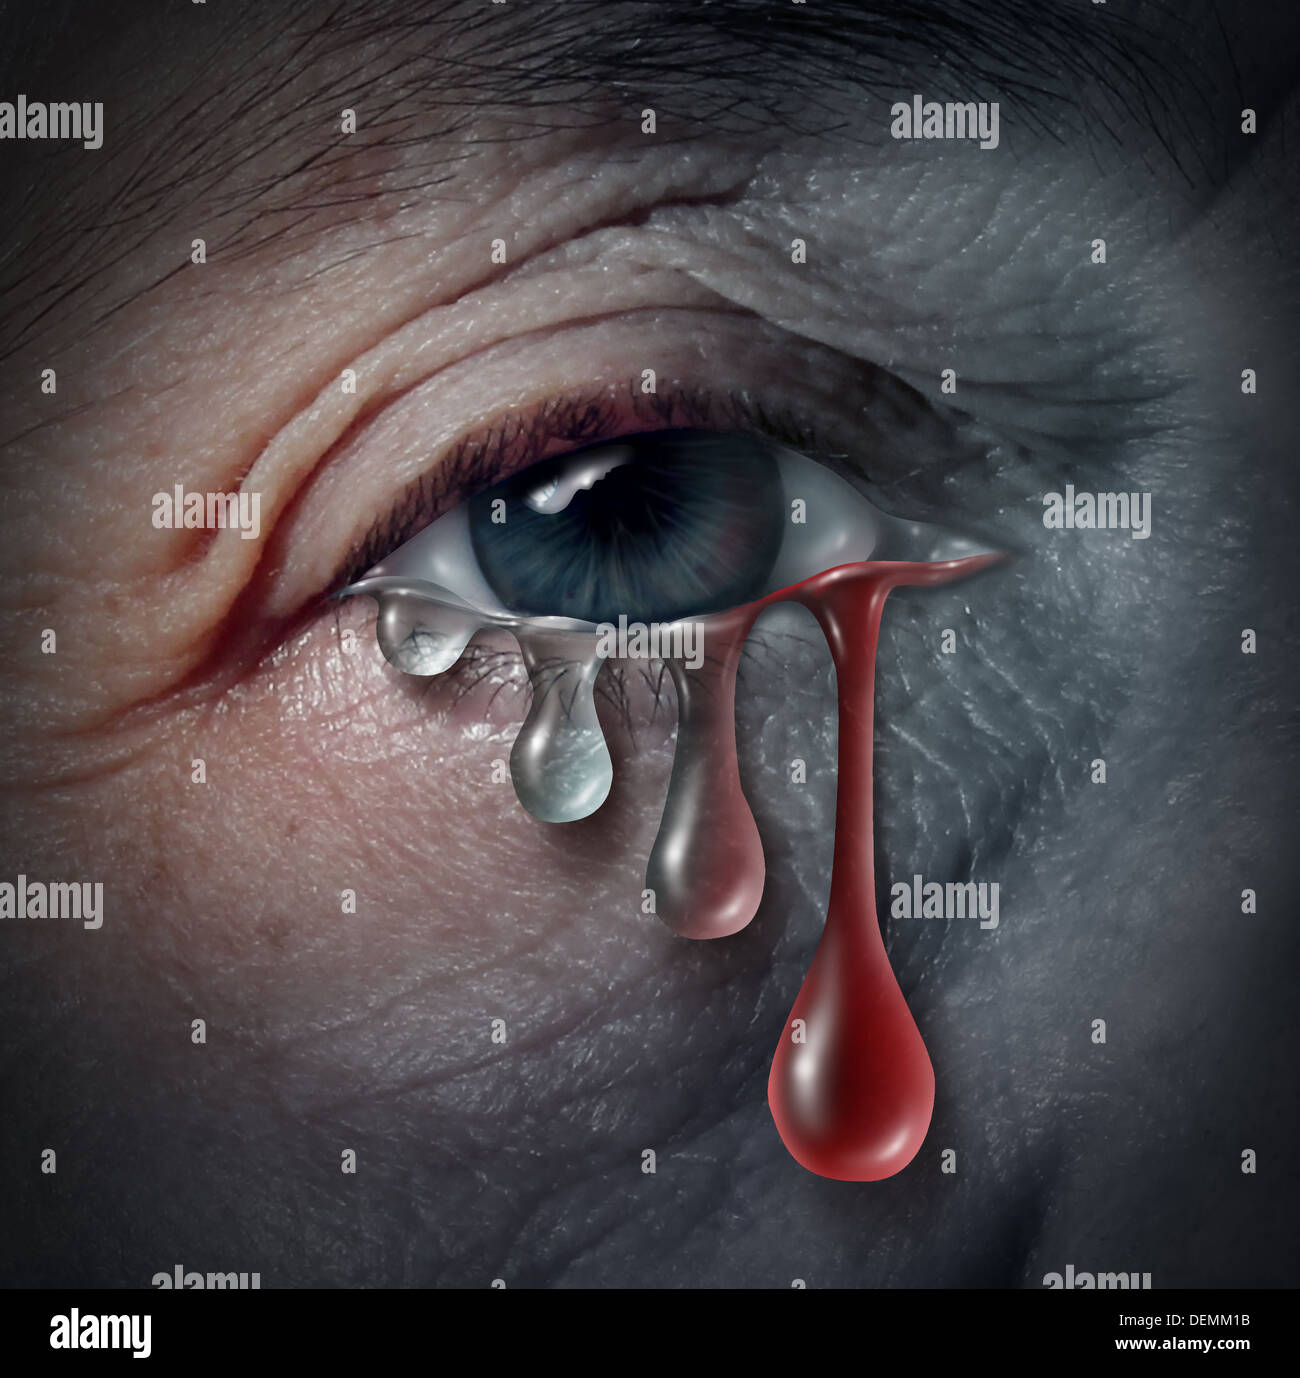 Increasing depression dangers as a mental health issue related to despair and emotional illness based on grief or chemical imbalance anxiety risk in a close up of a human eye crying a tear drop that gradualy transforms into blood. Stock Photo